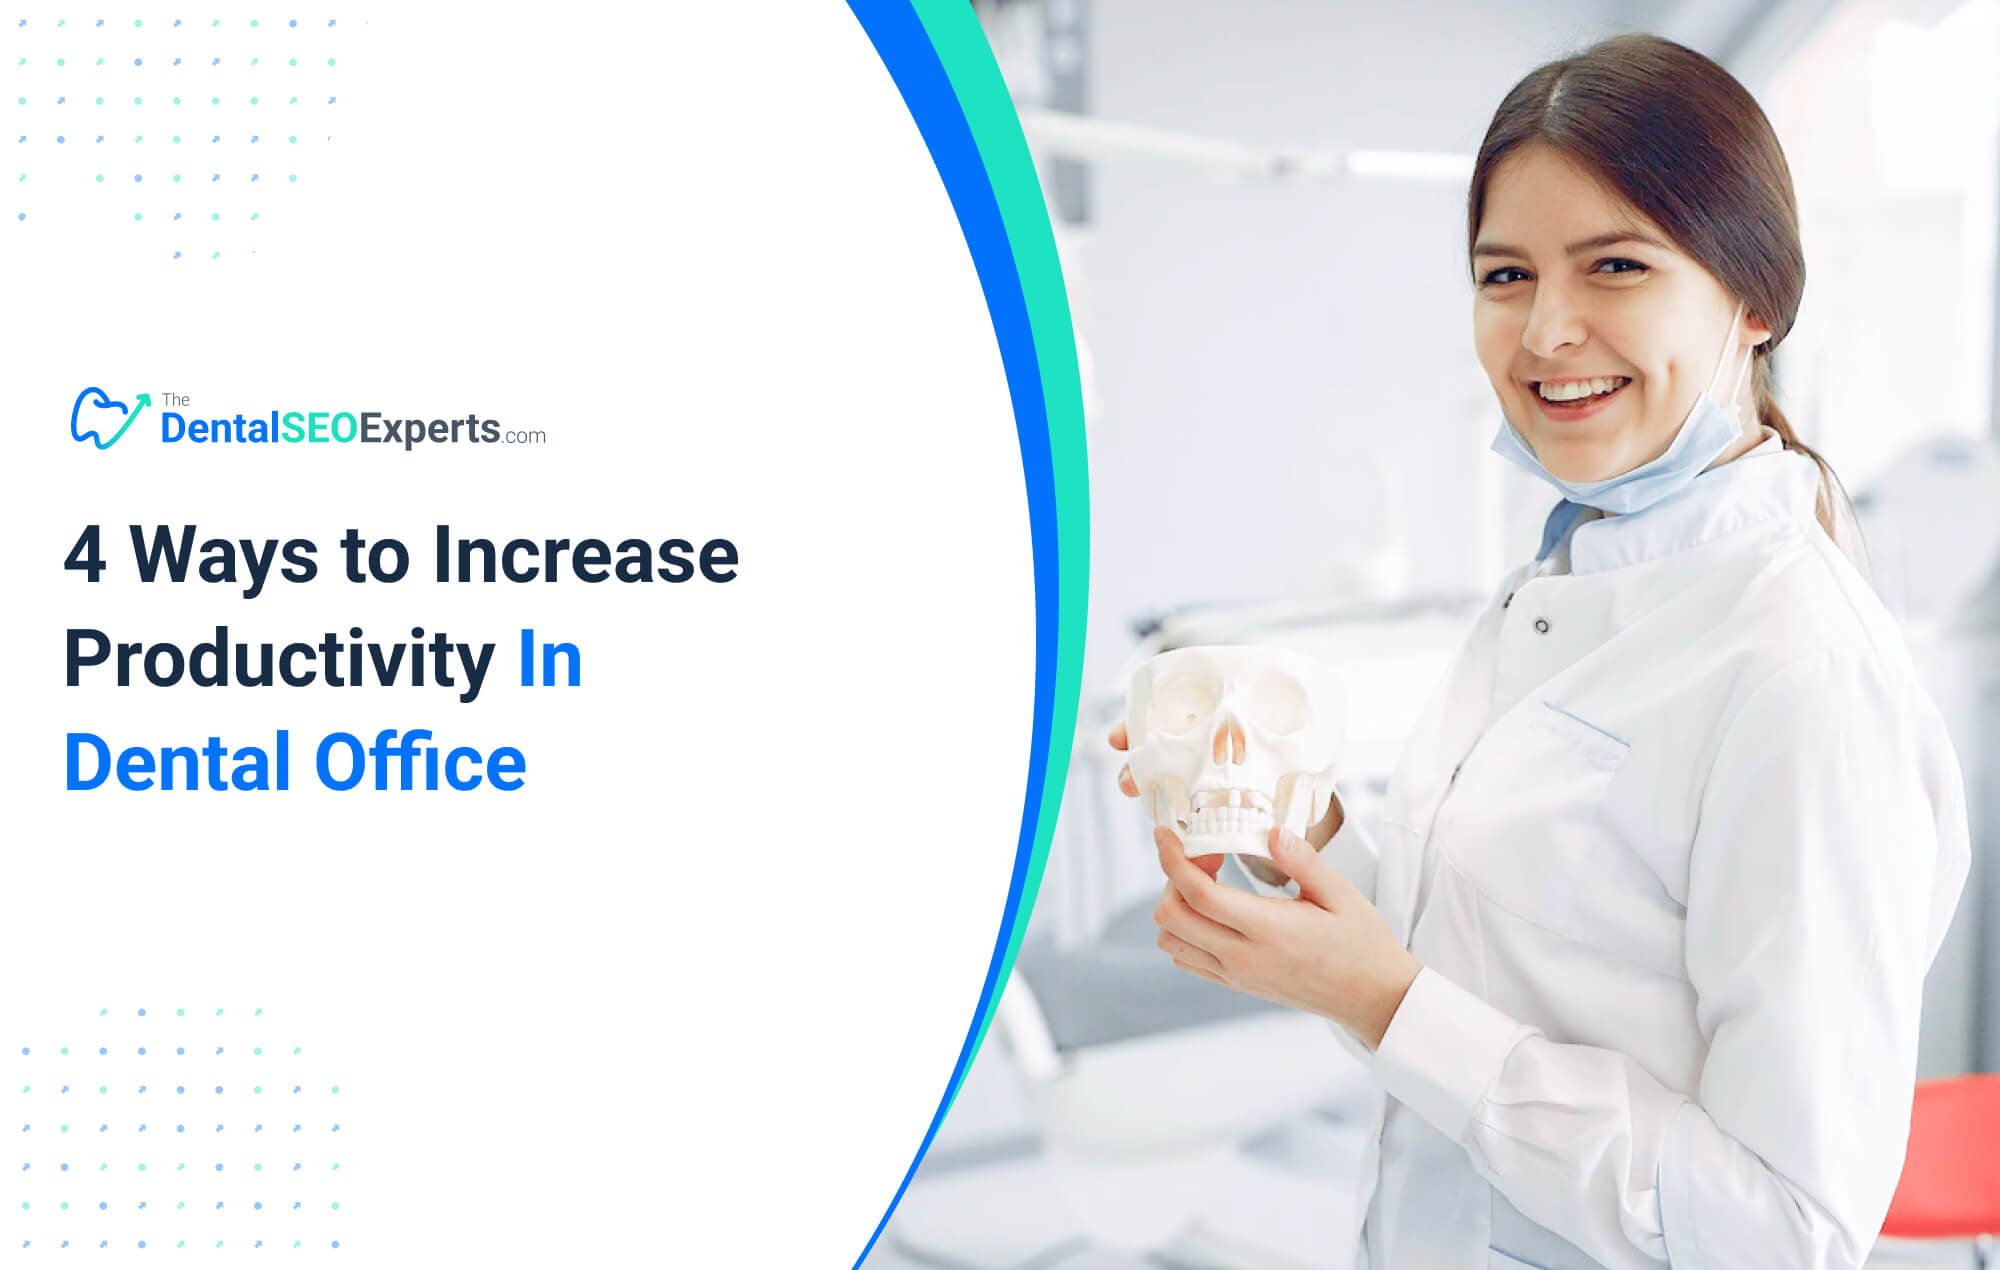 4 Ways to Increase Productivity In Dental Office